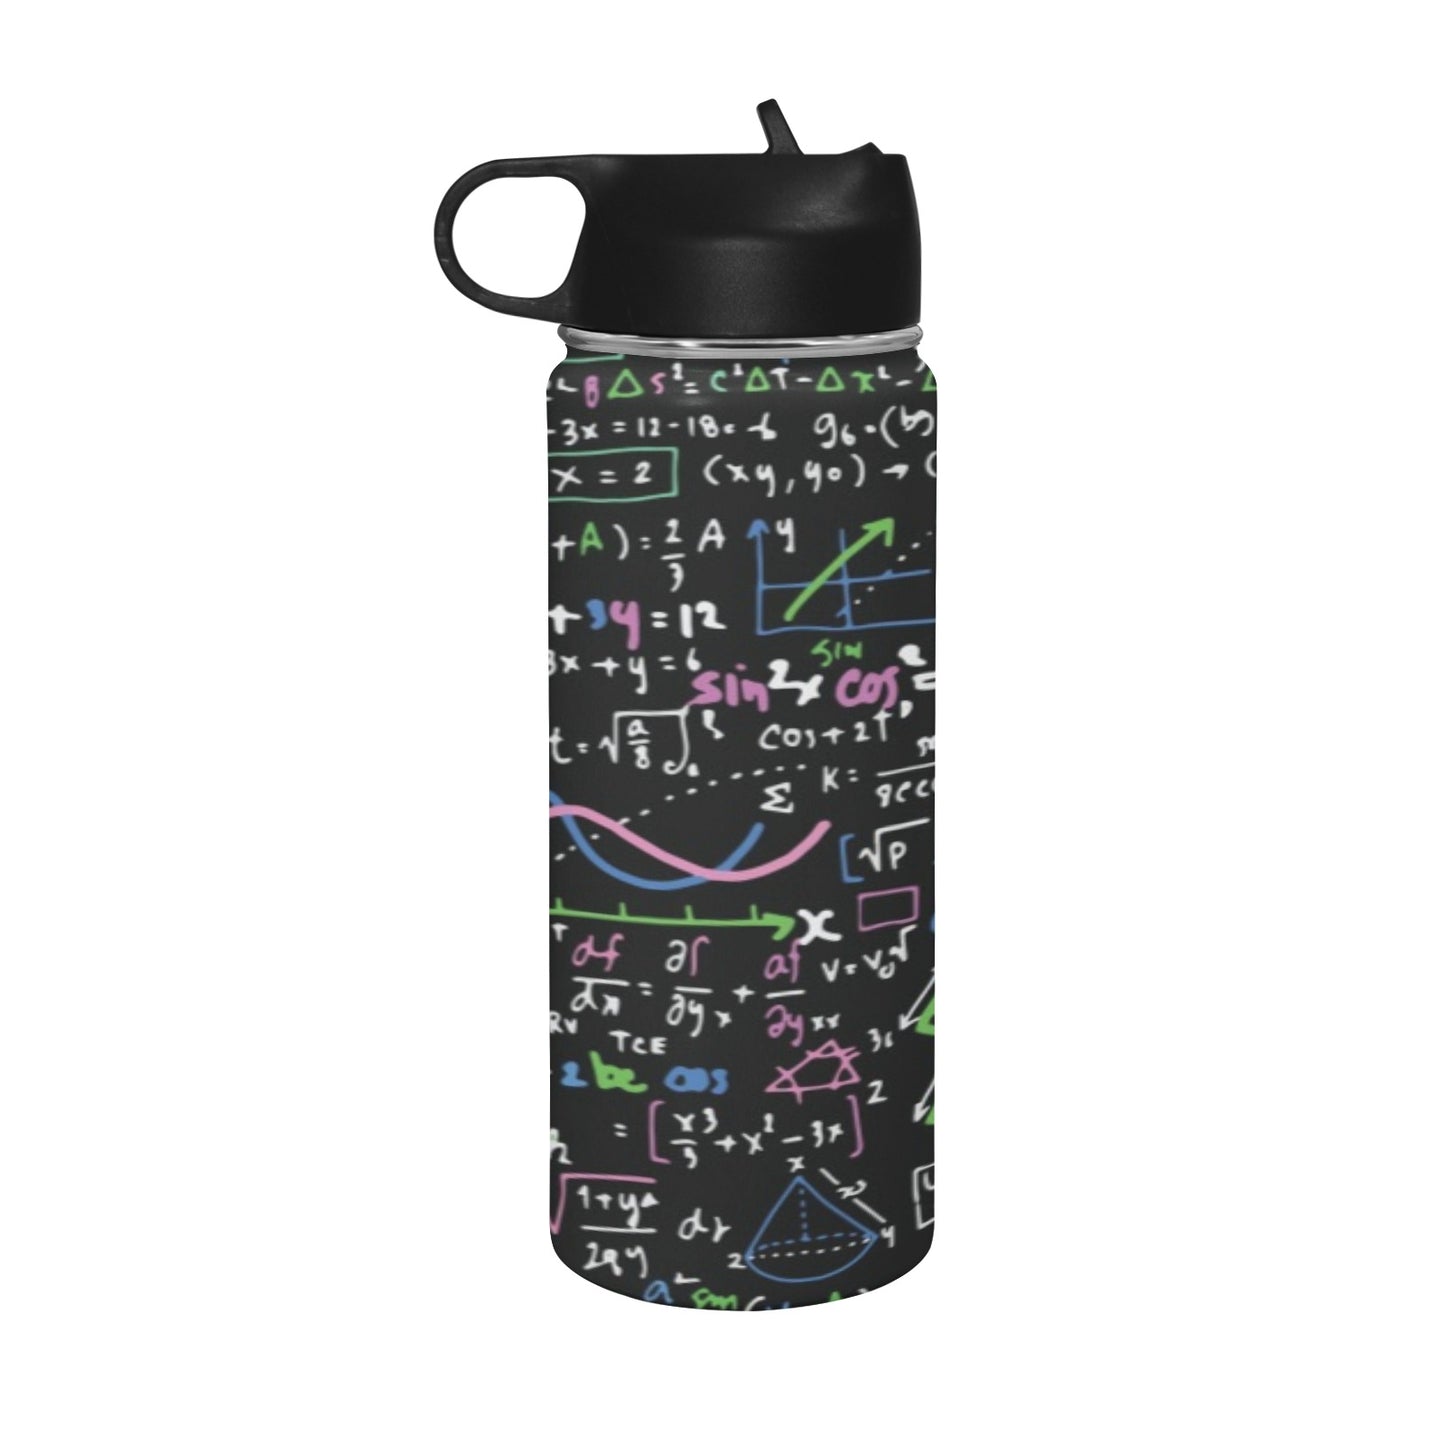 Equations In Green And Pink - Insulated Water Bottle with Straw Lid (18 oz) Insulated Water Bottle with Straw Lid